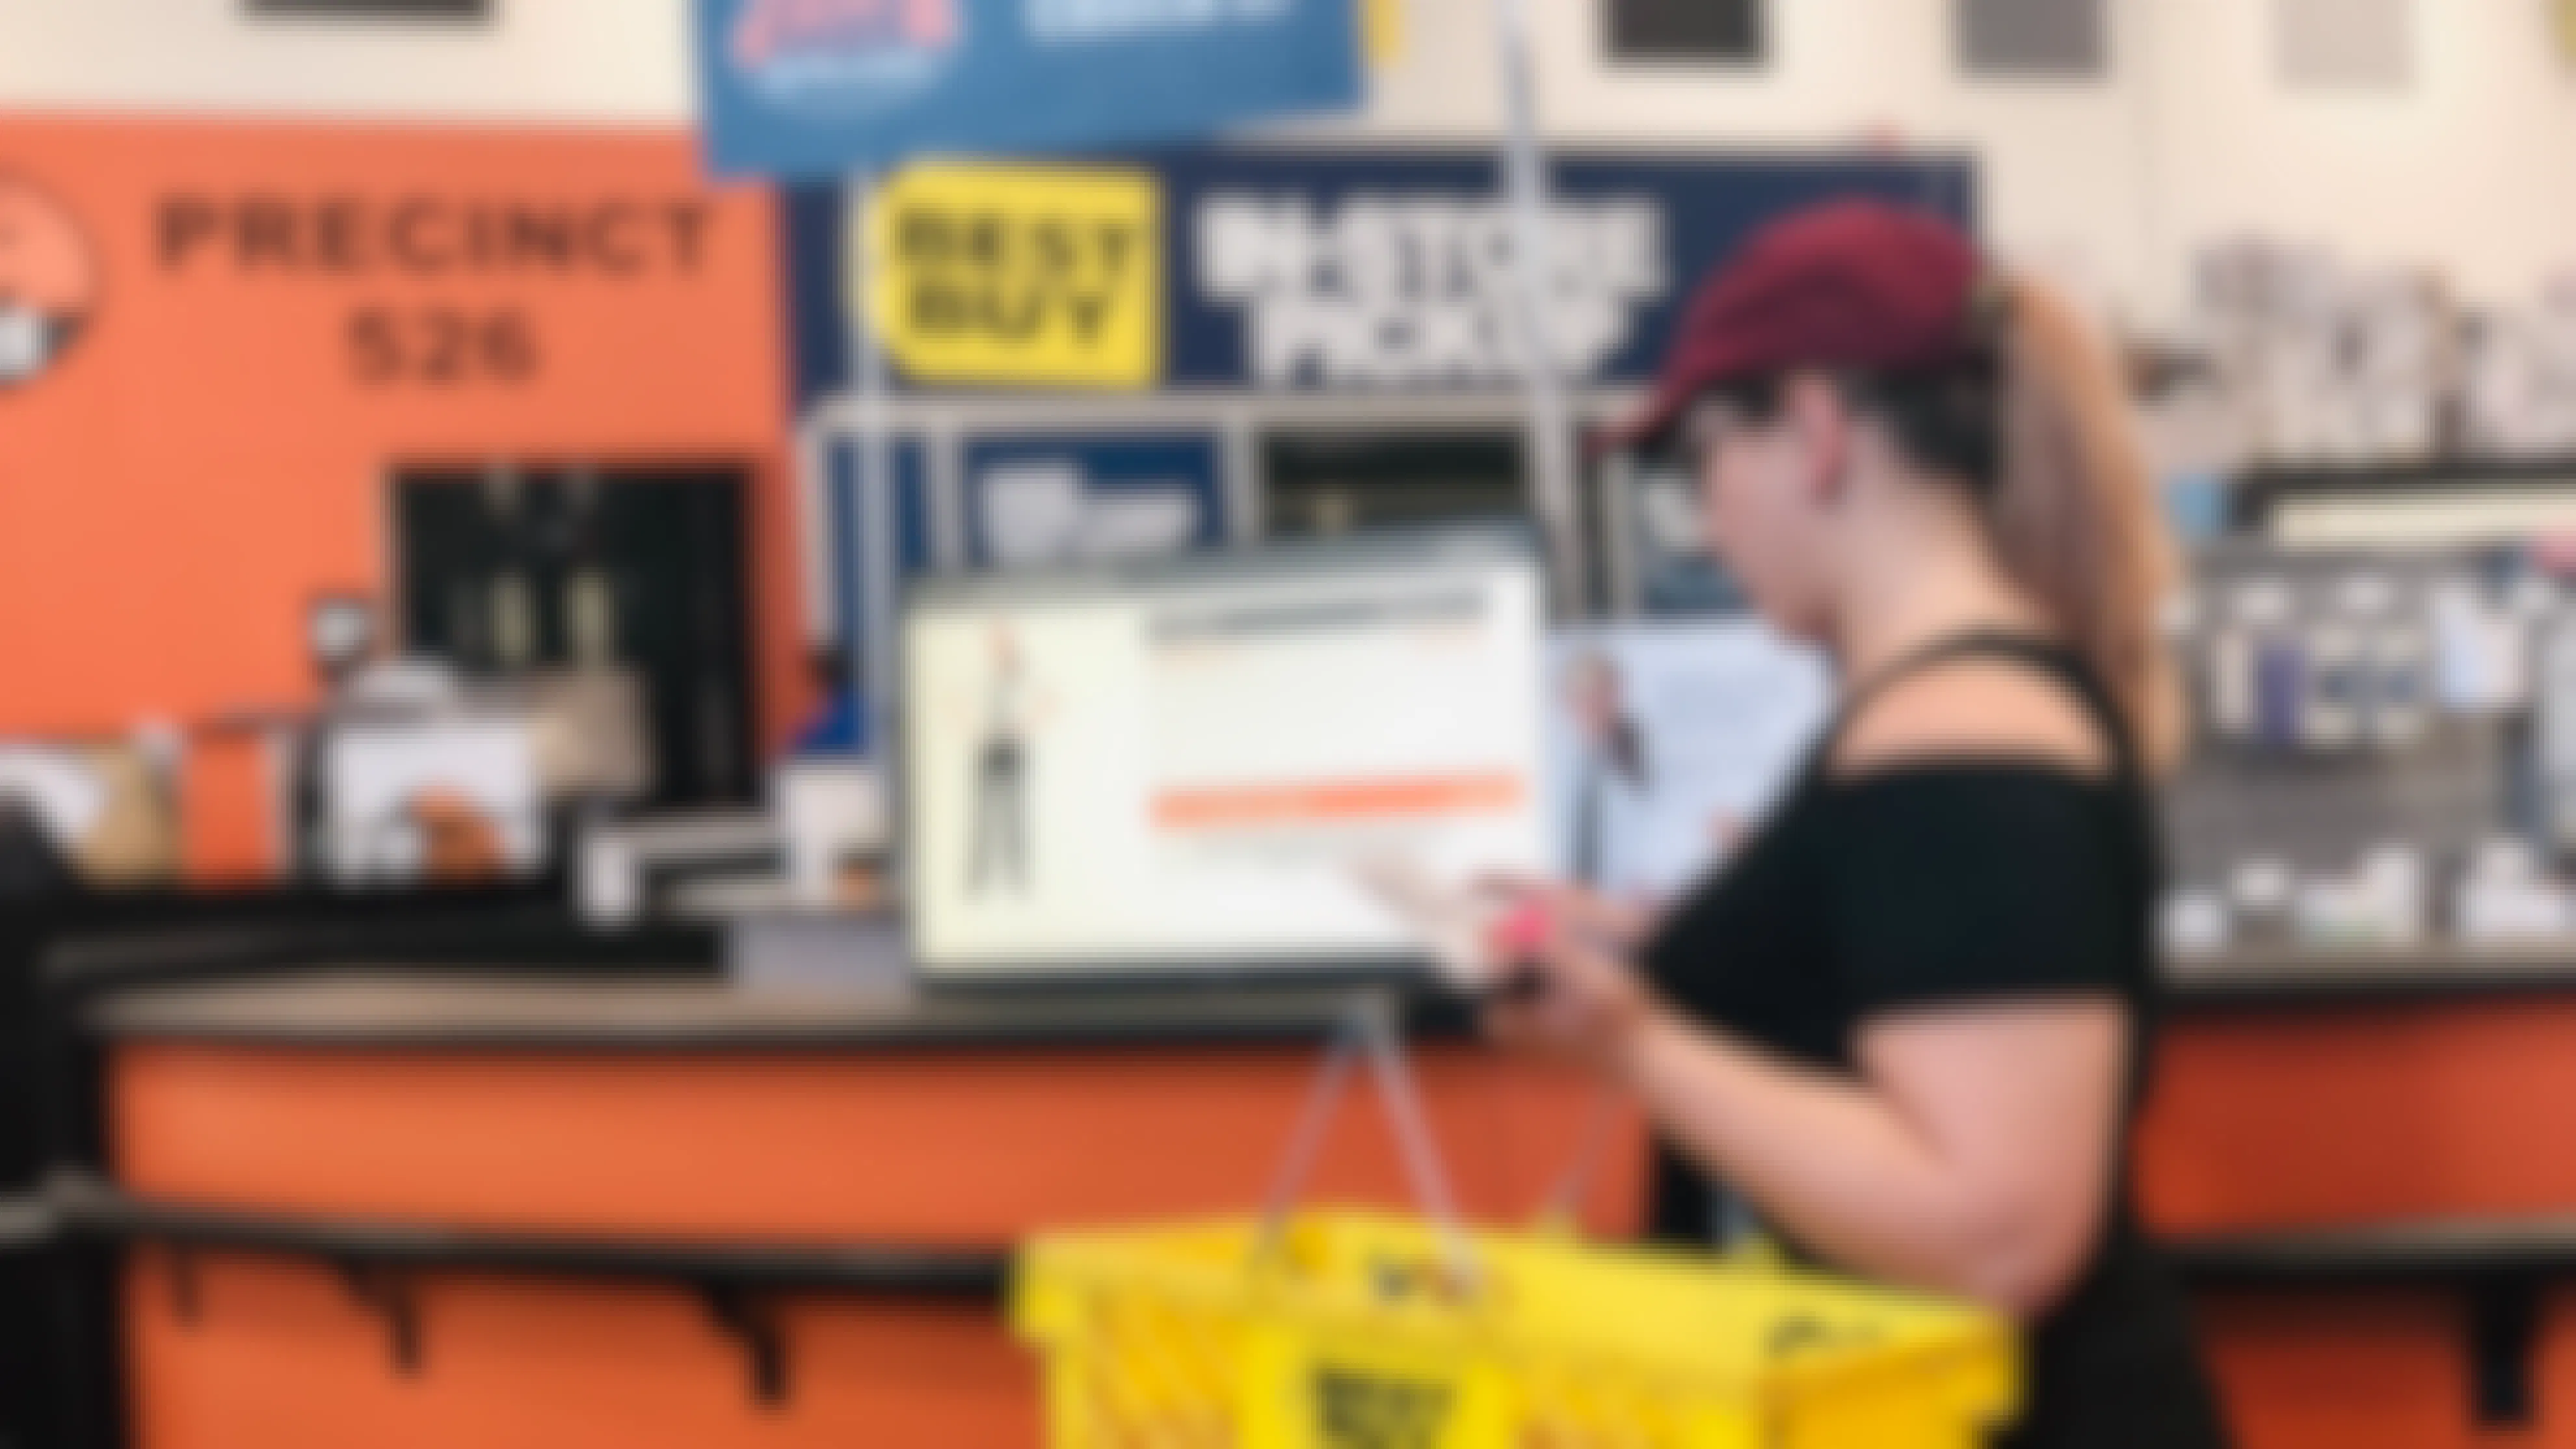 woman stands in front of the best buy geek squad desk